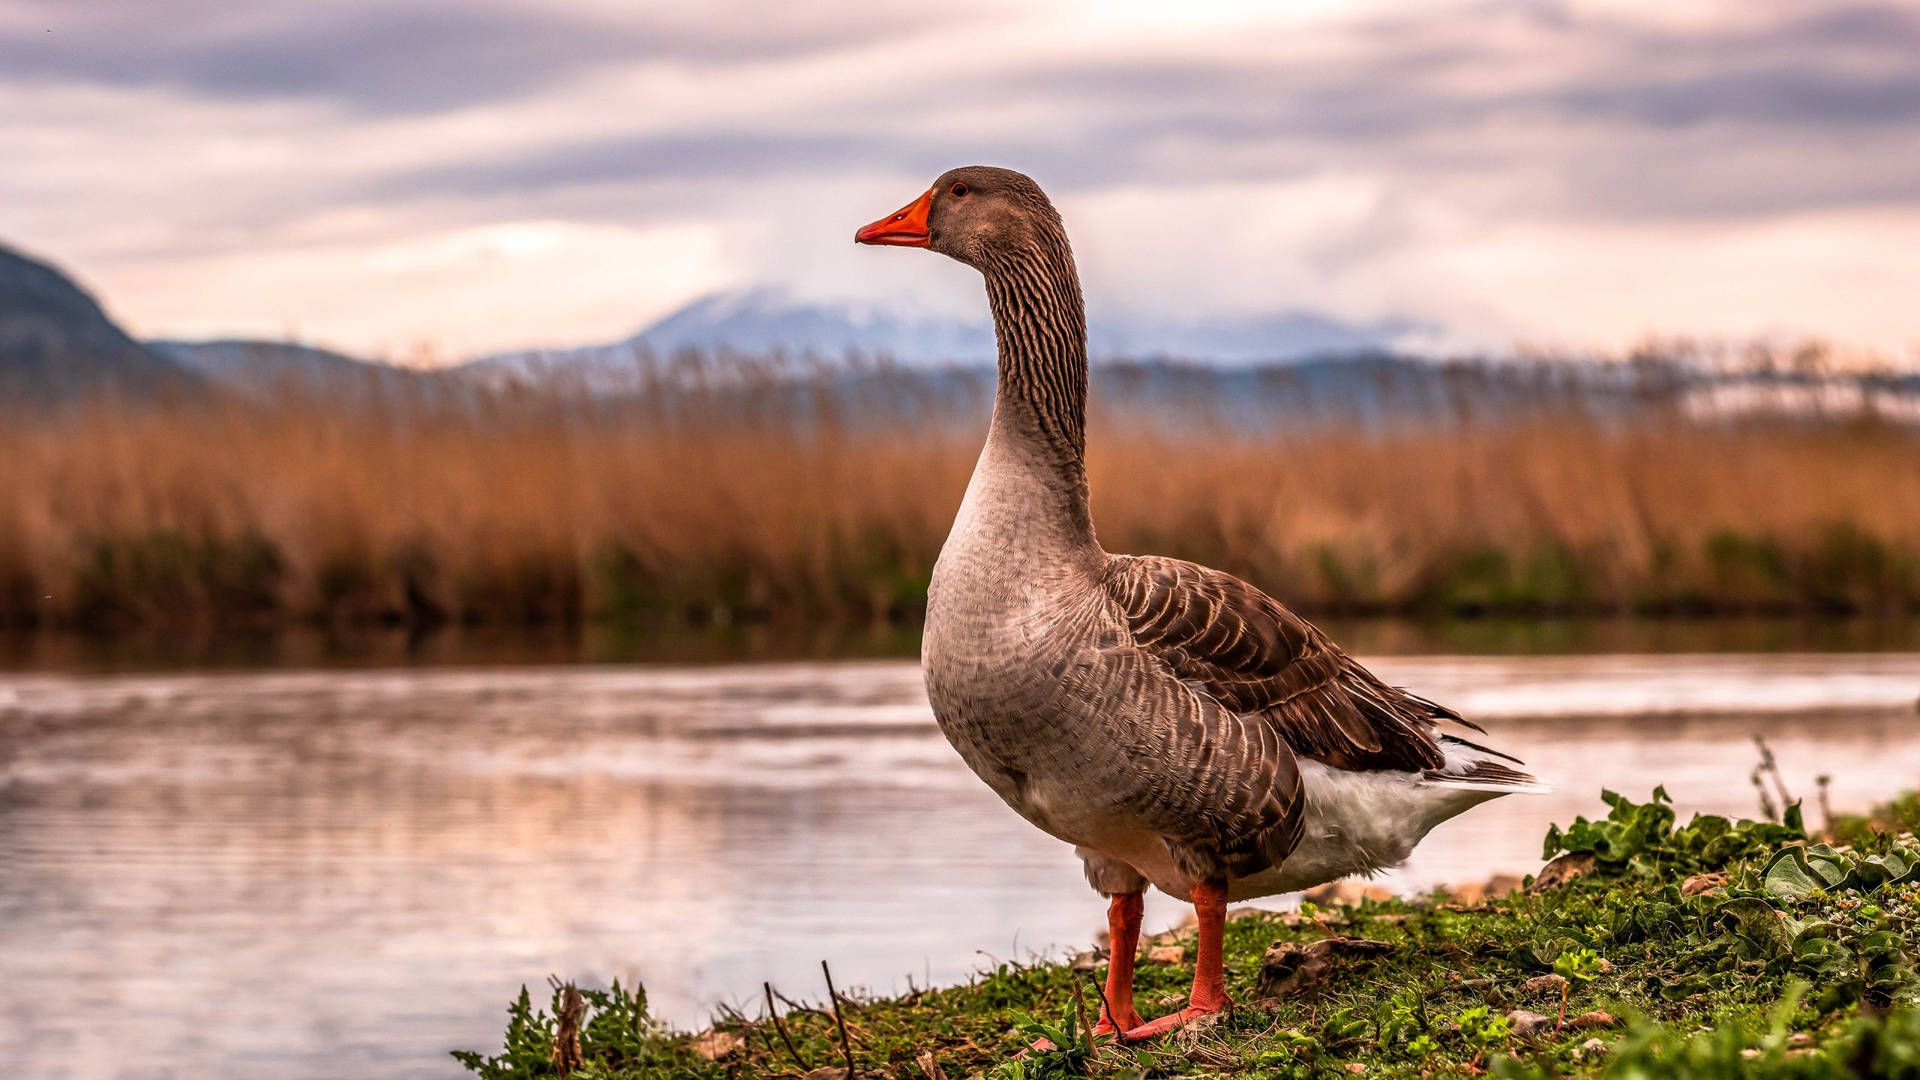 Wild Goose Perched On Riverbank